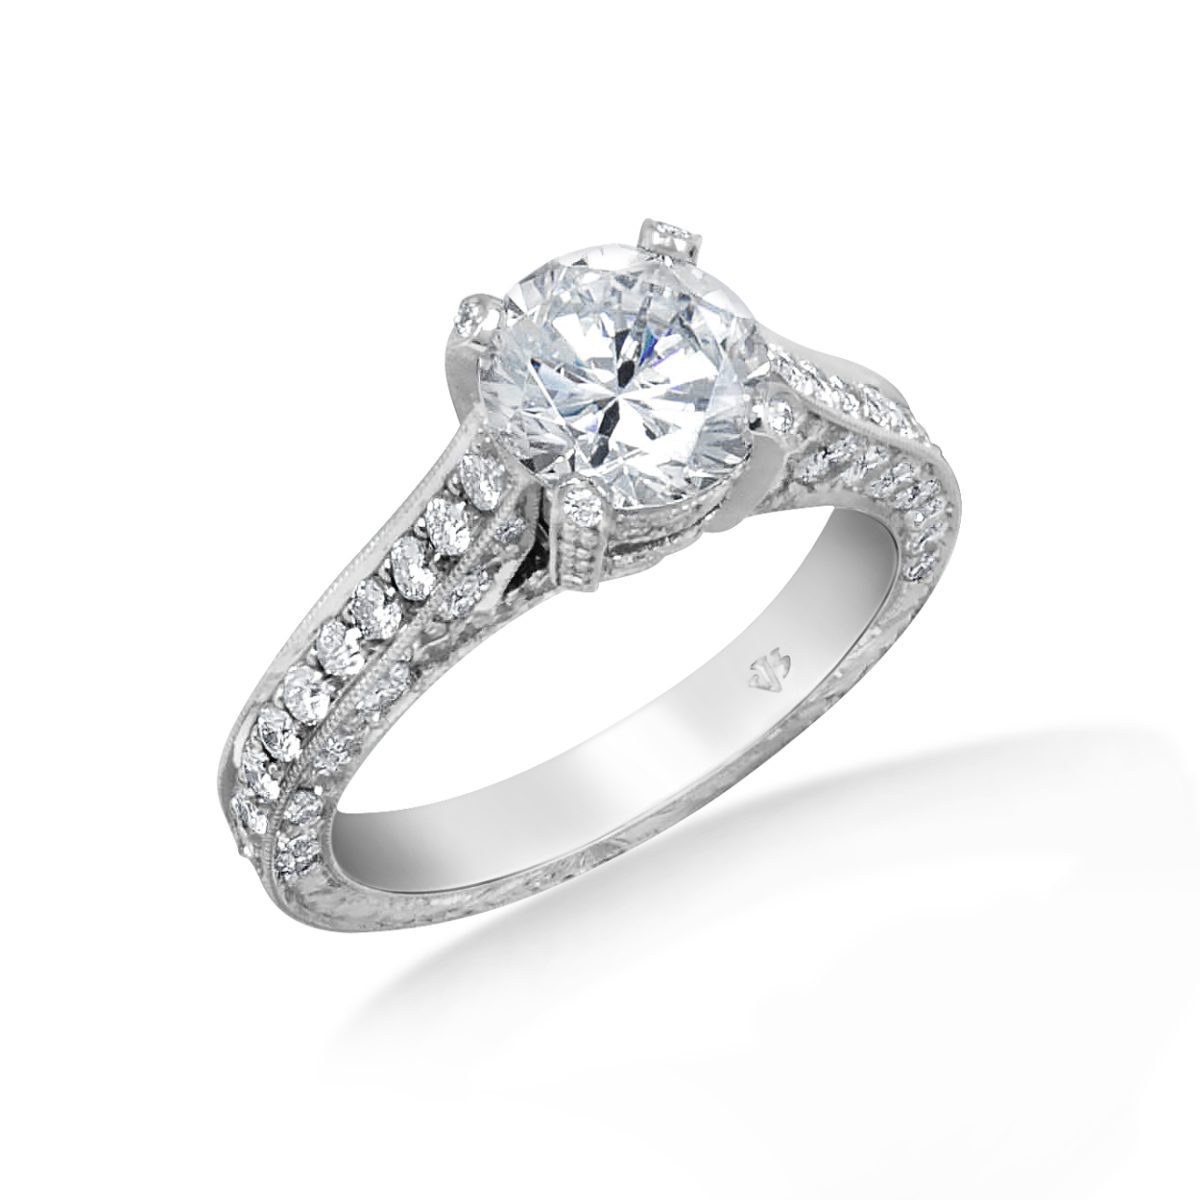 Jack Kelége Ring 001-140-00075 18KW - Cornell's Jewelers | Cornell's  Jewelers | Rochester, NY